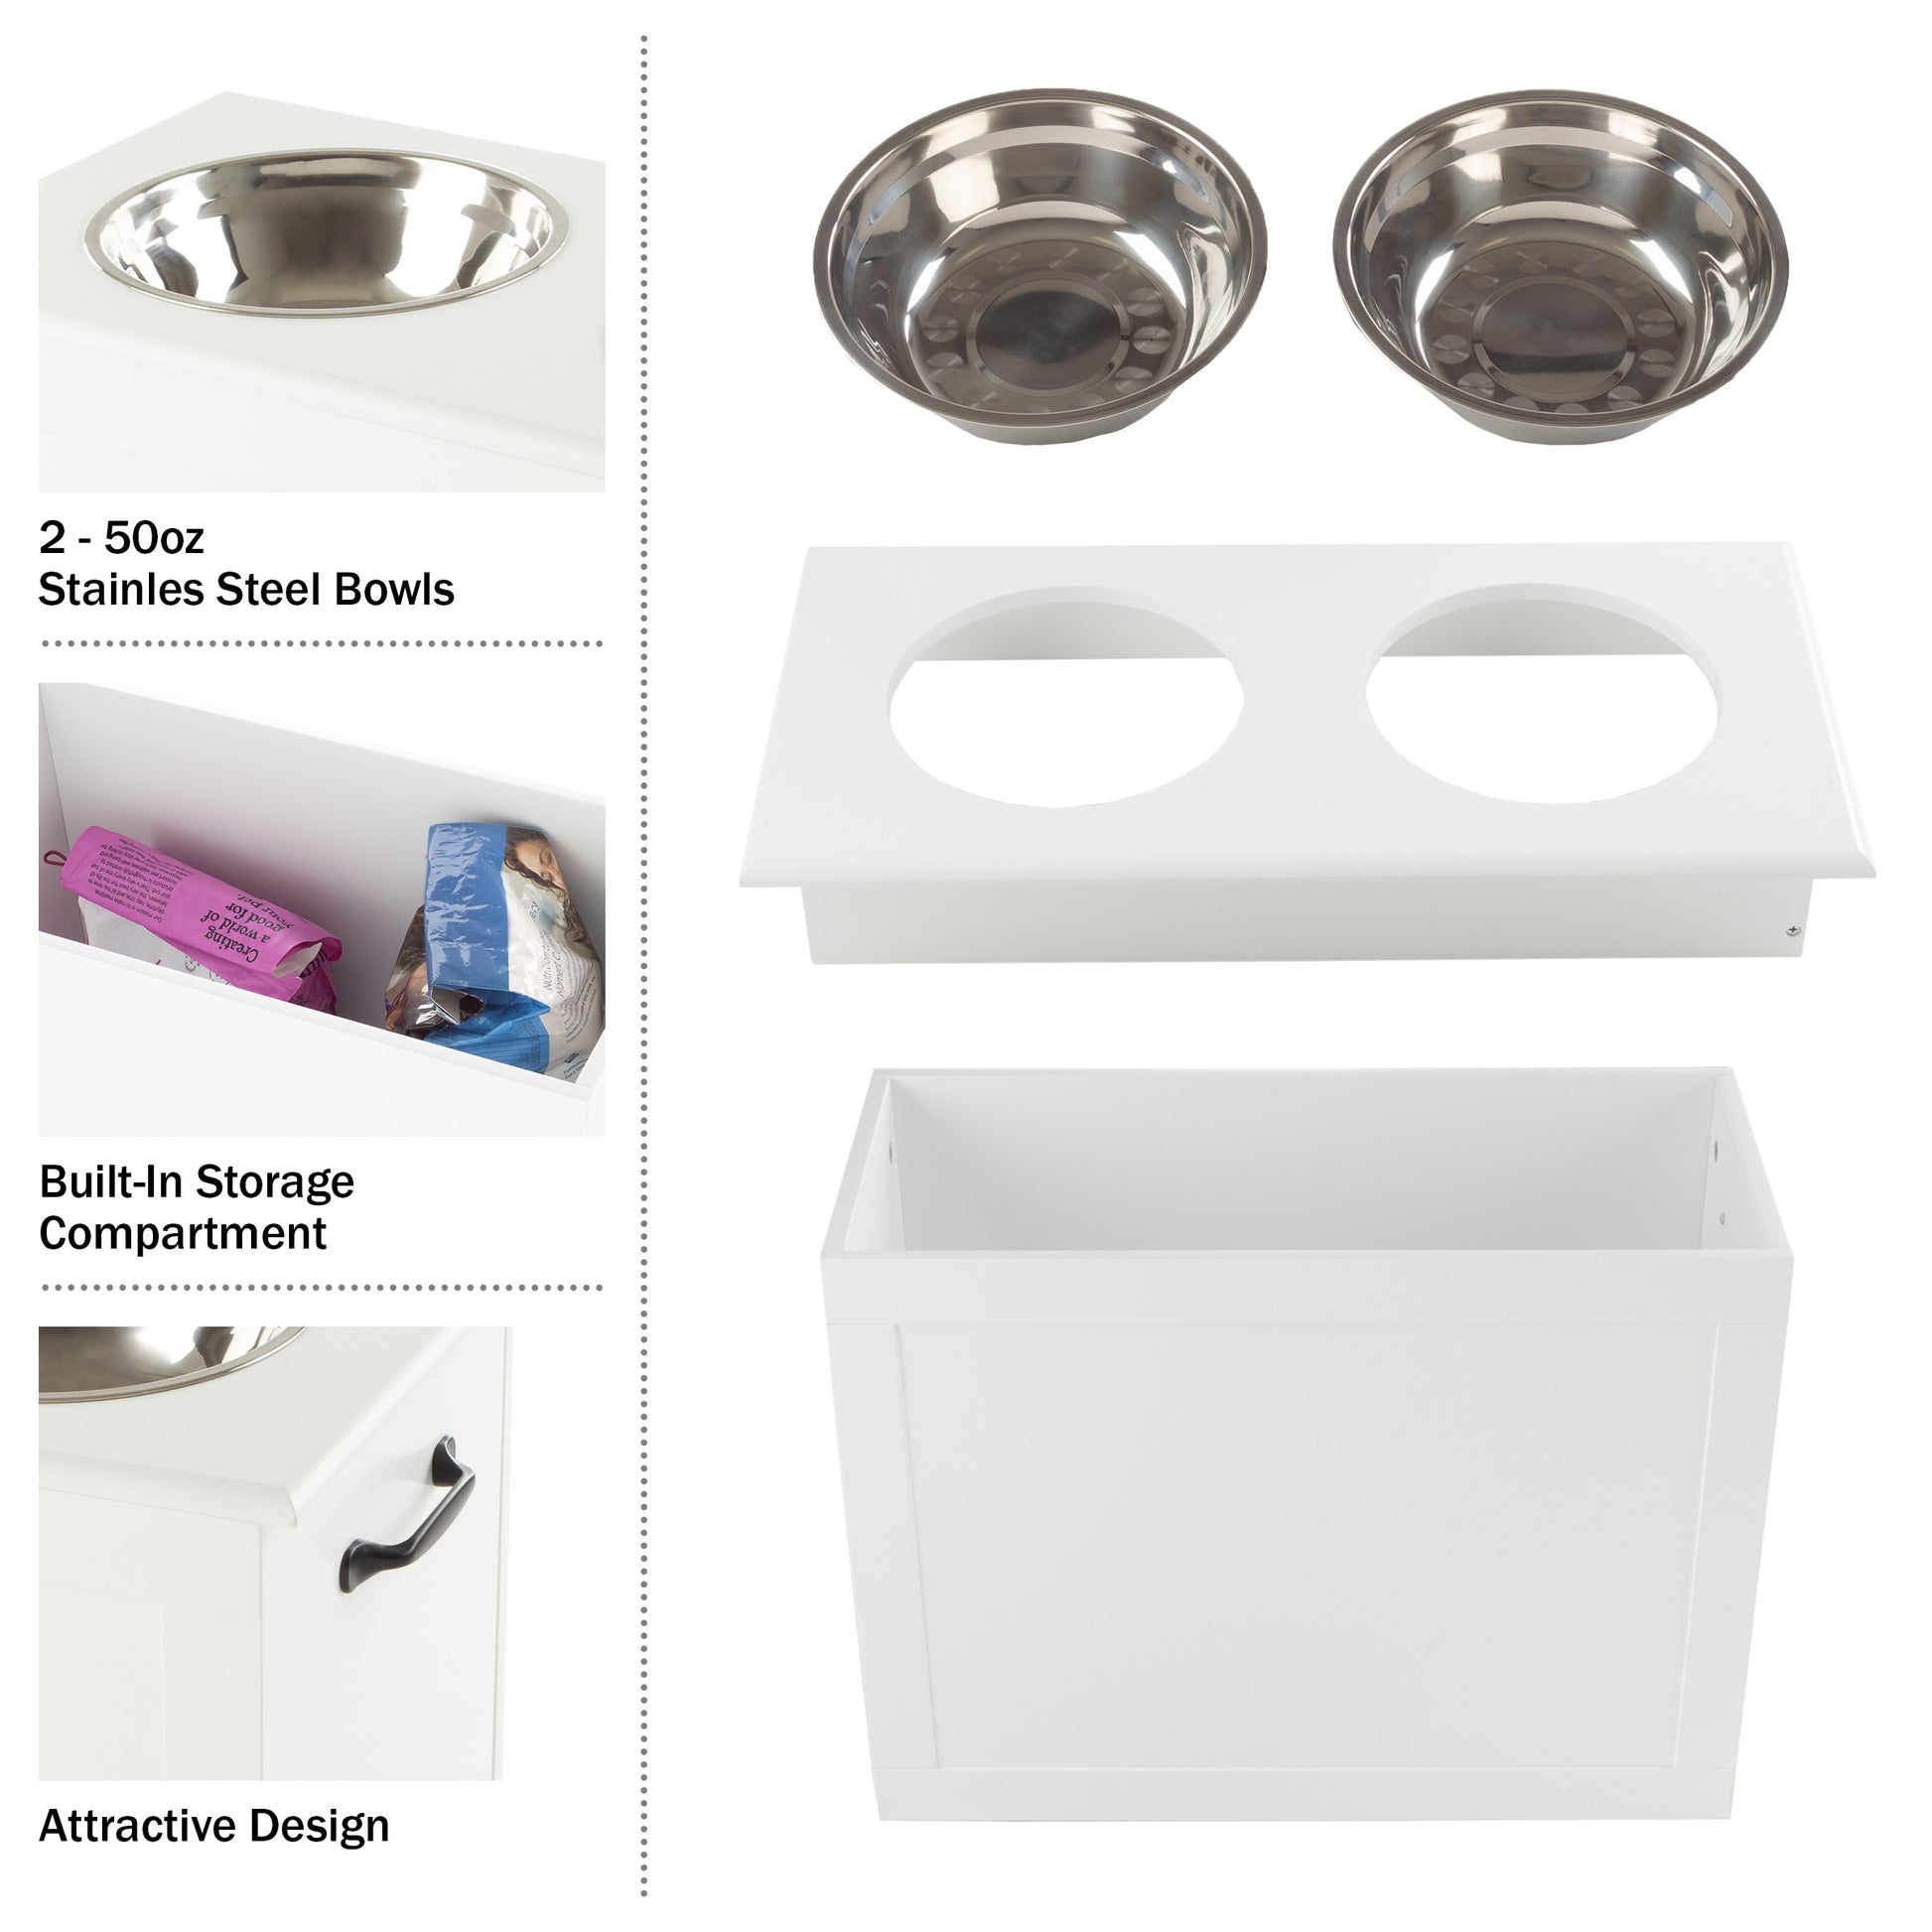 Elevated Dog Bowls with Storage - 16-Inch-Tall Feeding Tray with Hidden  Storage Space for Pet Supplies - 50oz Capacity Bowls by PETMAKER (White)